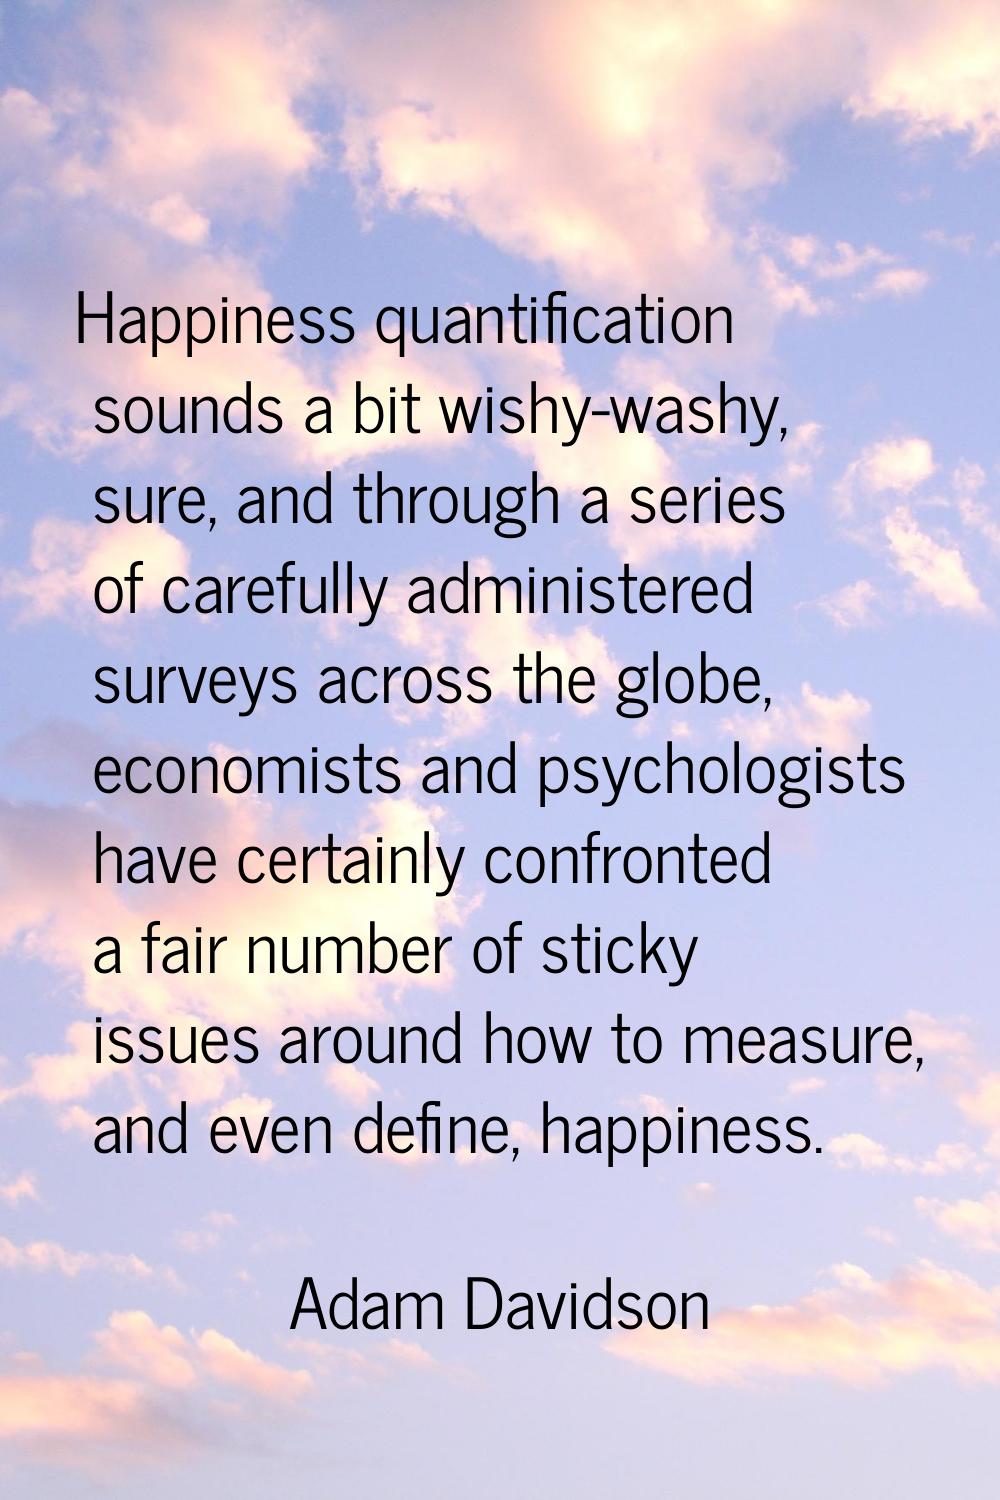 Happiness quantification sounds a bit wishy-washy, sure, and through a series of carefully administ